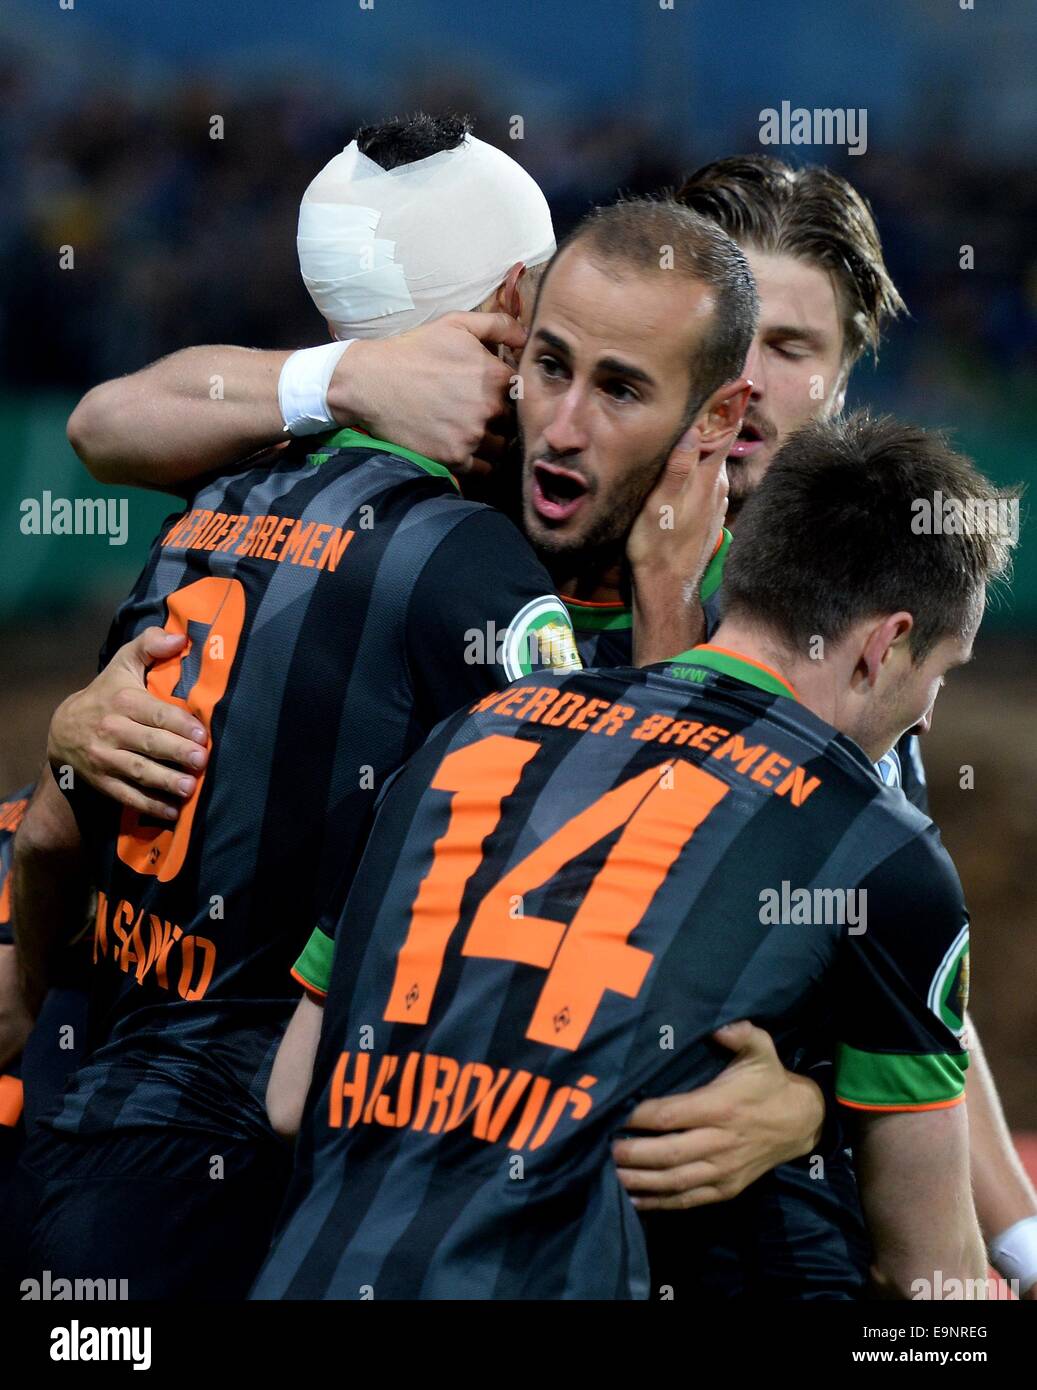 Chemnitz, Germany. 28th Oct, 2014. Bremen's Franco Di Santo (L) celebrates the 2-0 goal with his teammates during the DFB Cup second round match between Chemnitzer FC and Werder Bremen at the Stadium on Gellerstrasse in Chemnitz, Germany, 28 October 2014. Photo: HENDRIK SCHMIDT/dpa/Alamy Live News Stock Photo